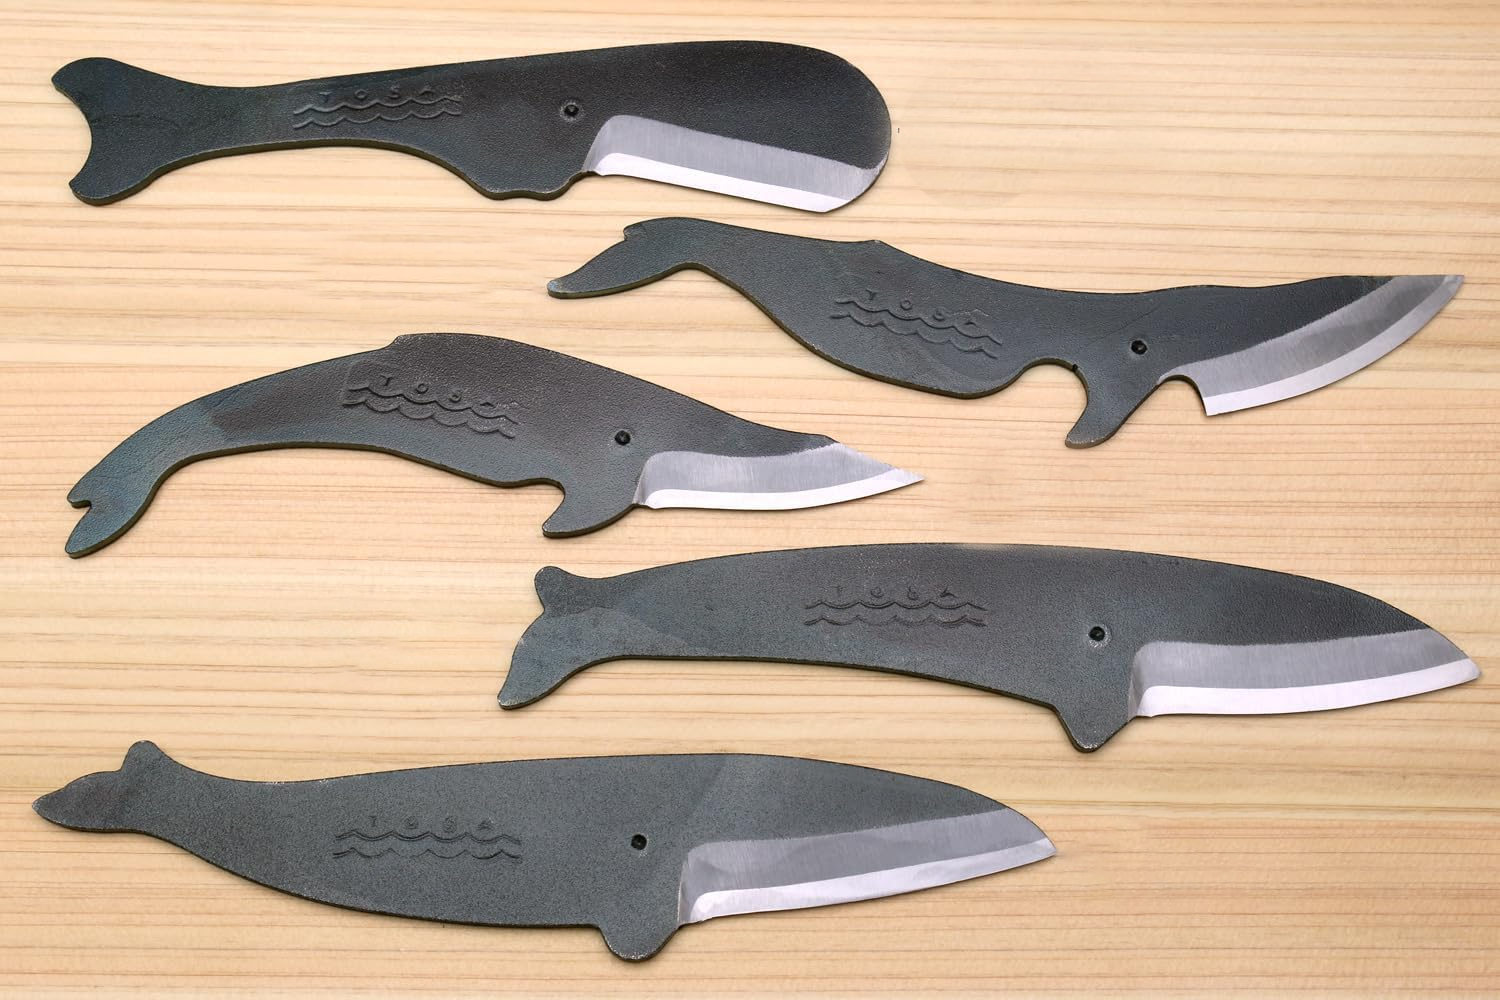 Six whale-shaped knives with unique blade shapes displayed on wooden surface